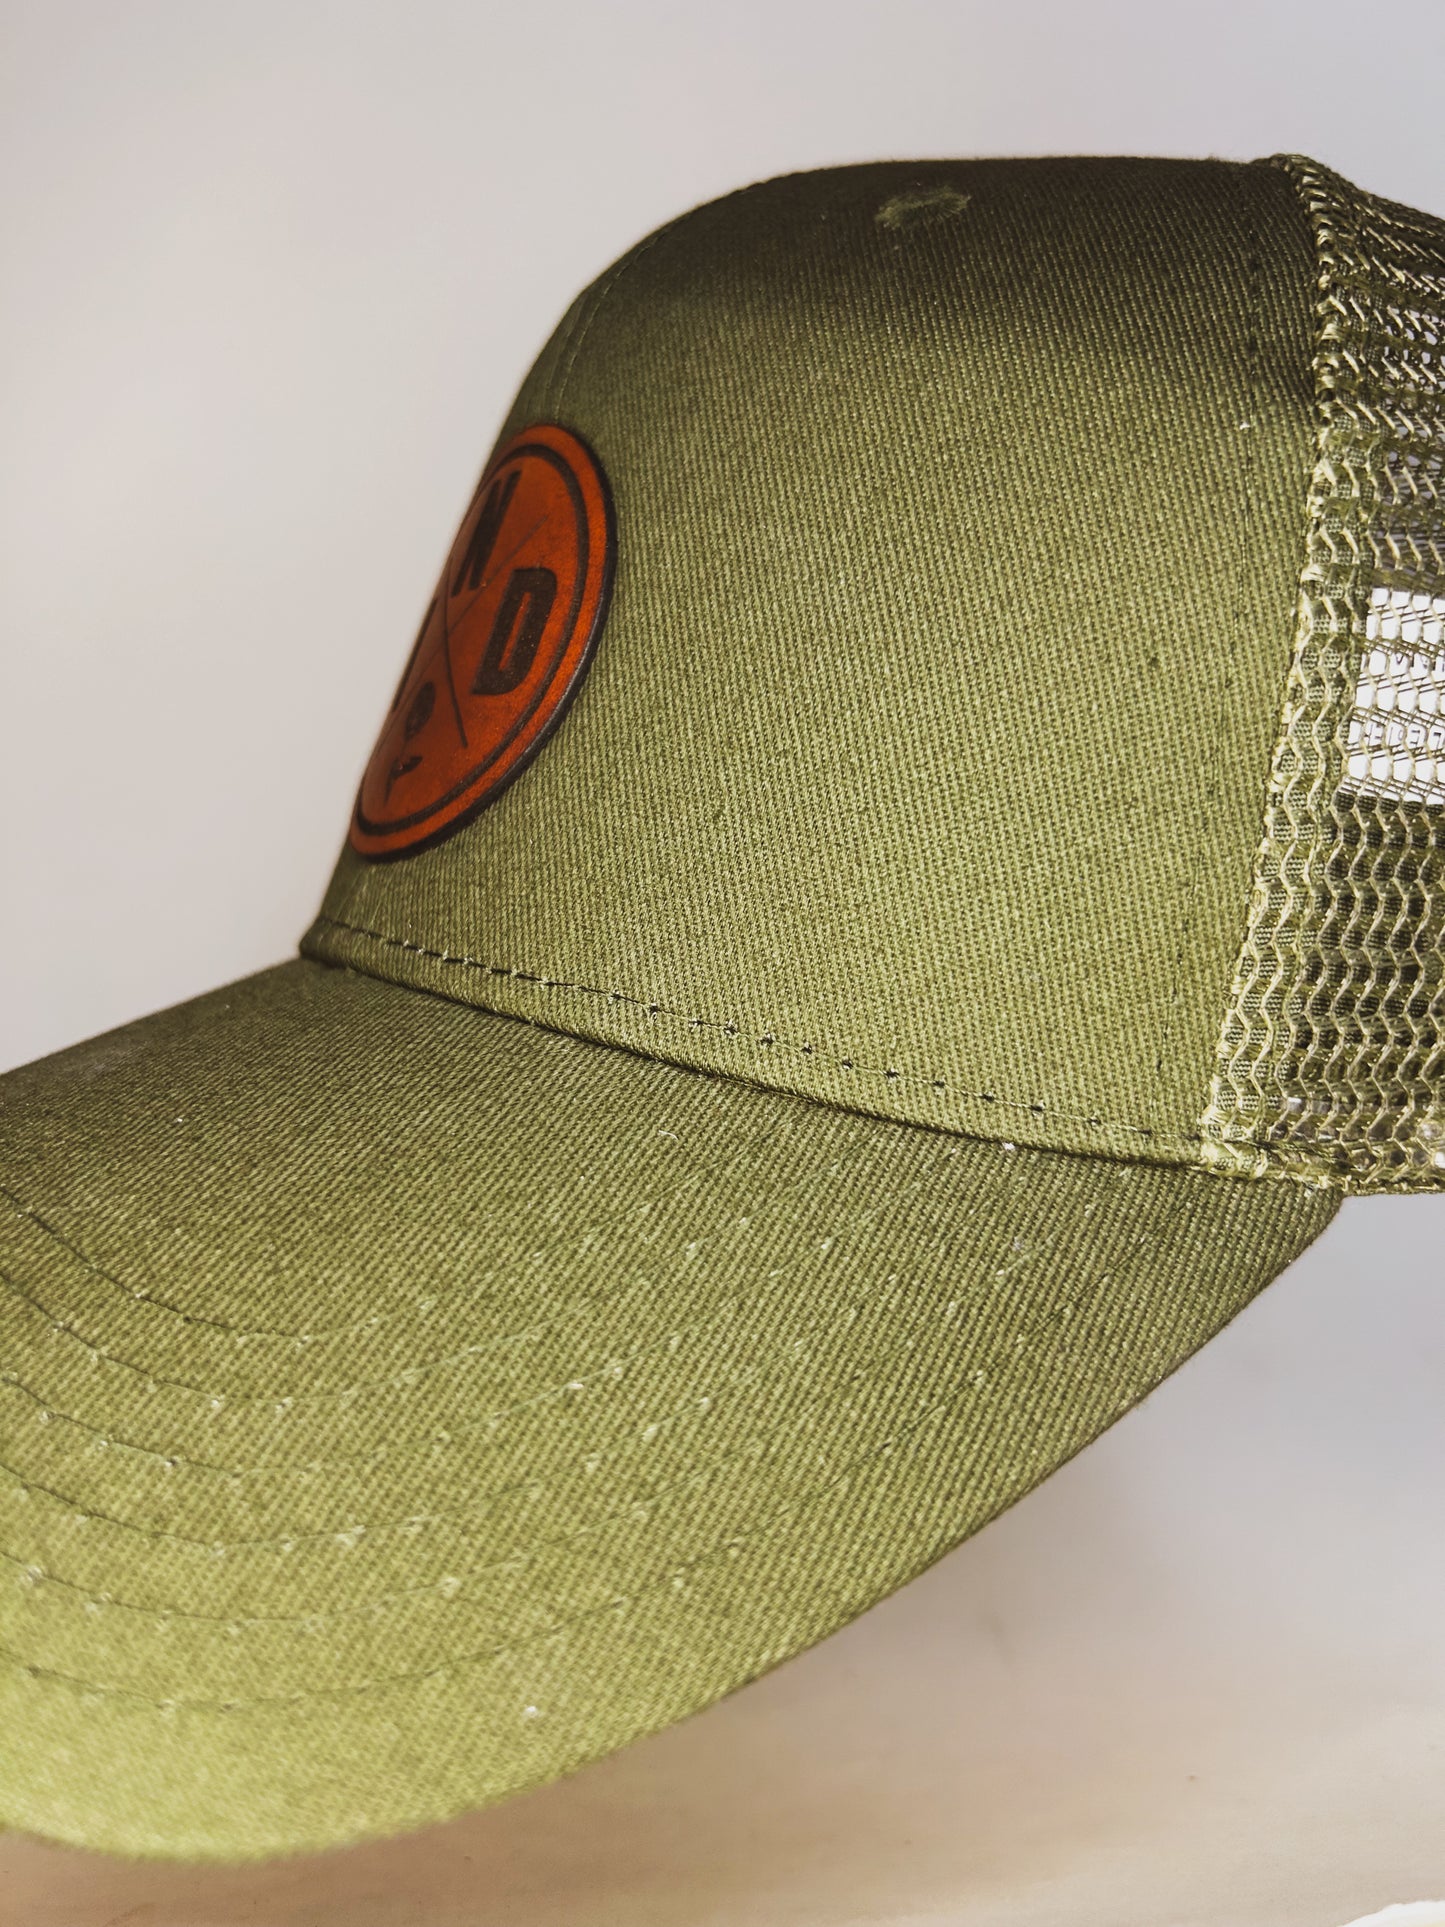 Circle IND Peony Patch on Olive Baseball Hat